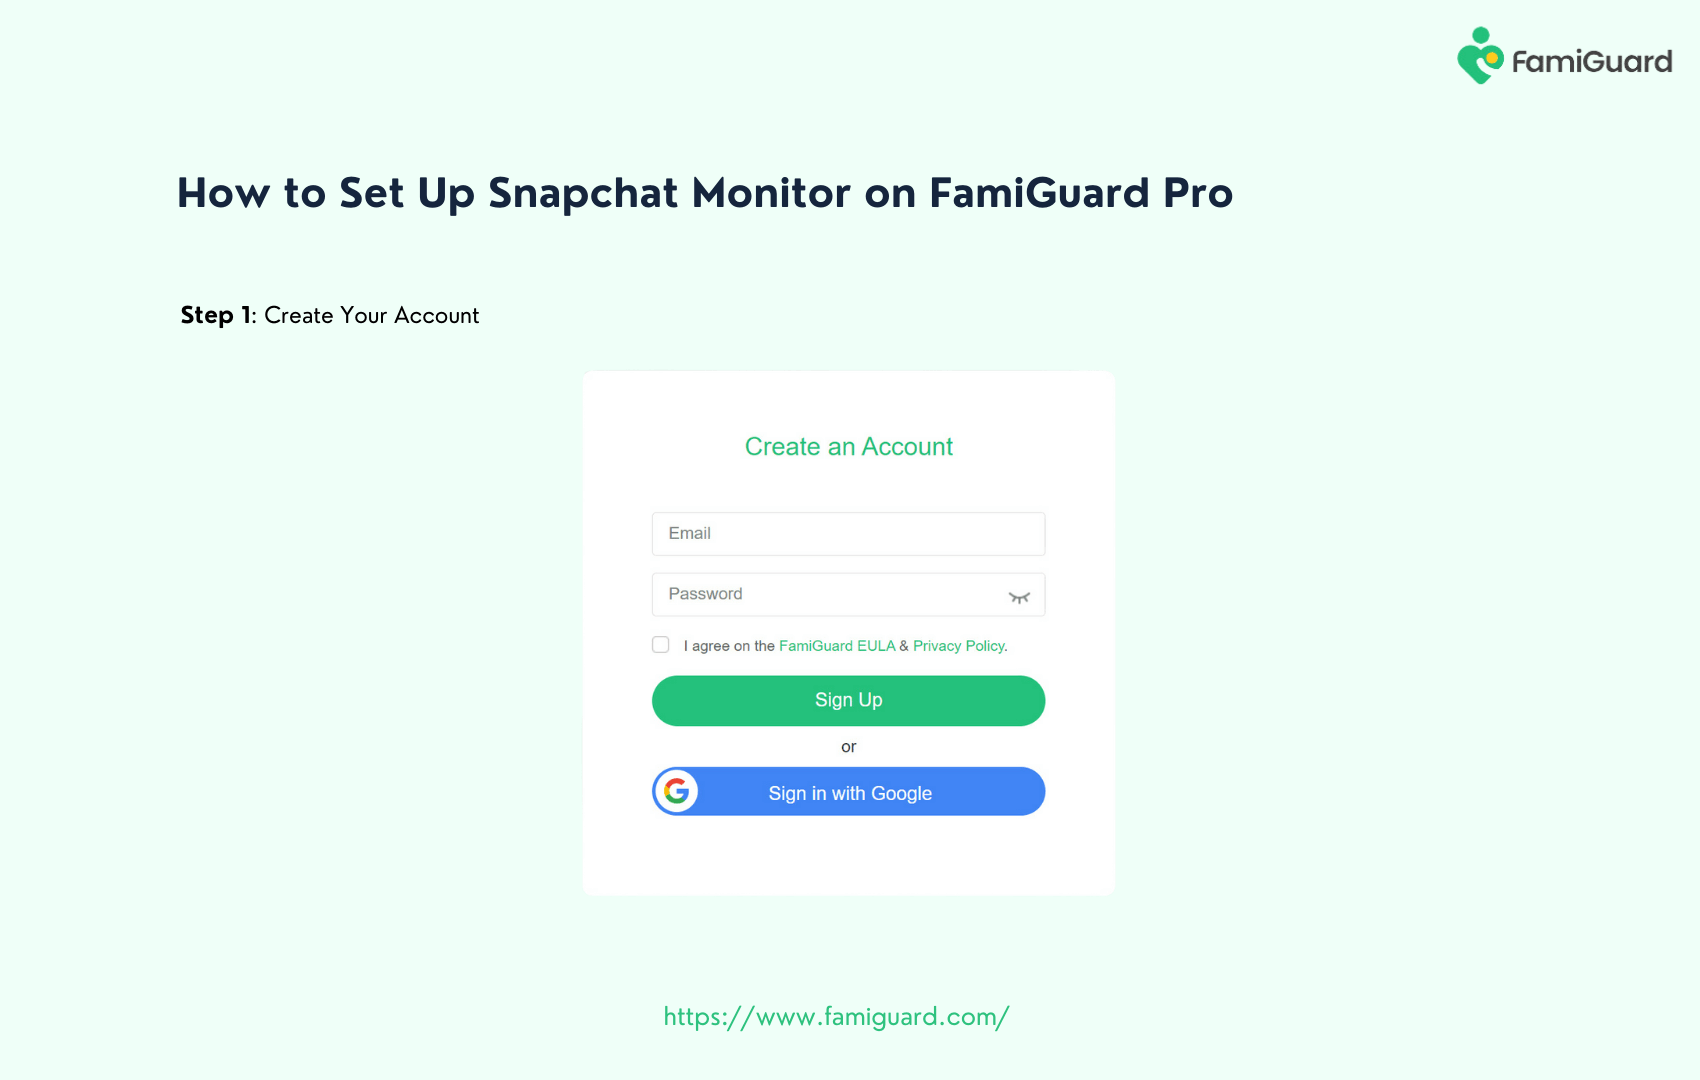 How to Sign Up FamiGuard
	Pro Account